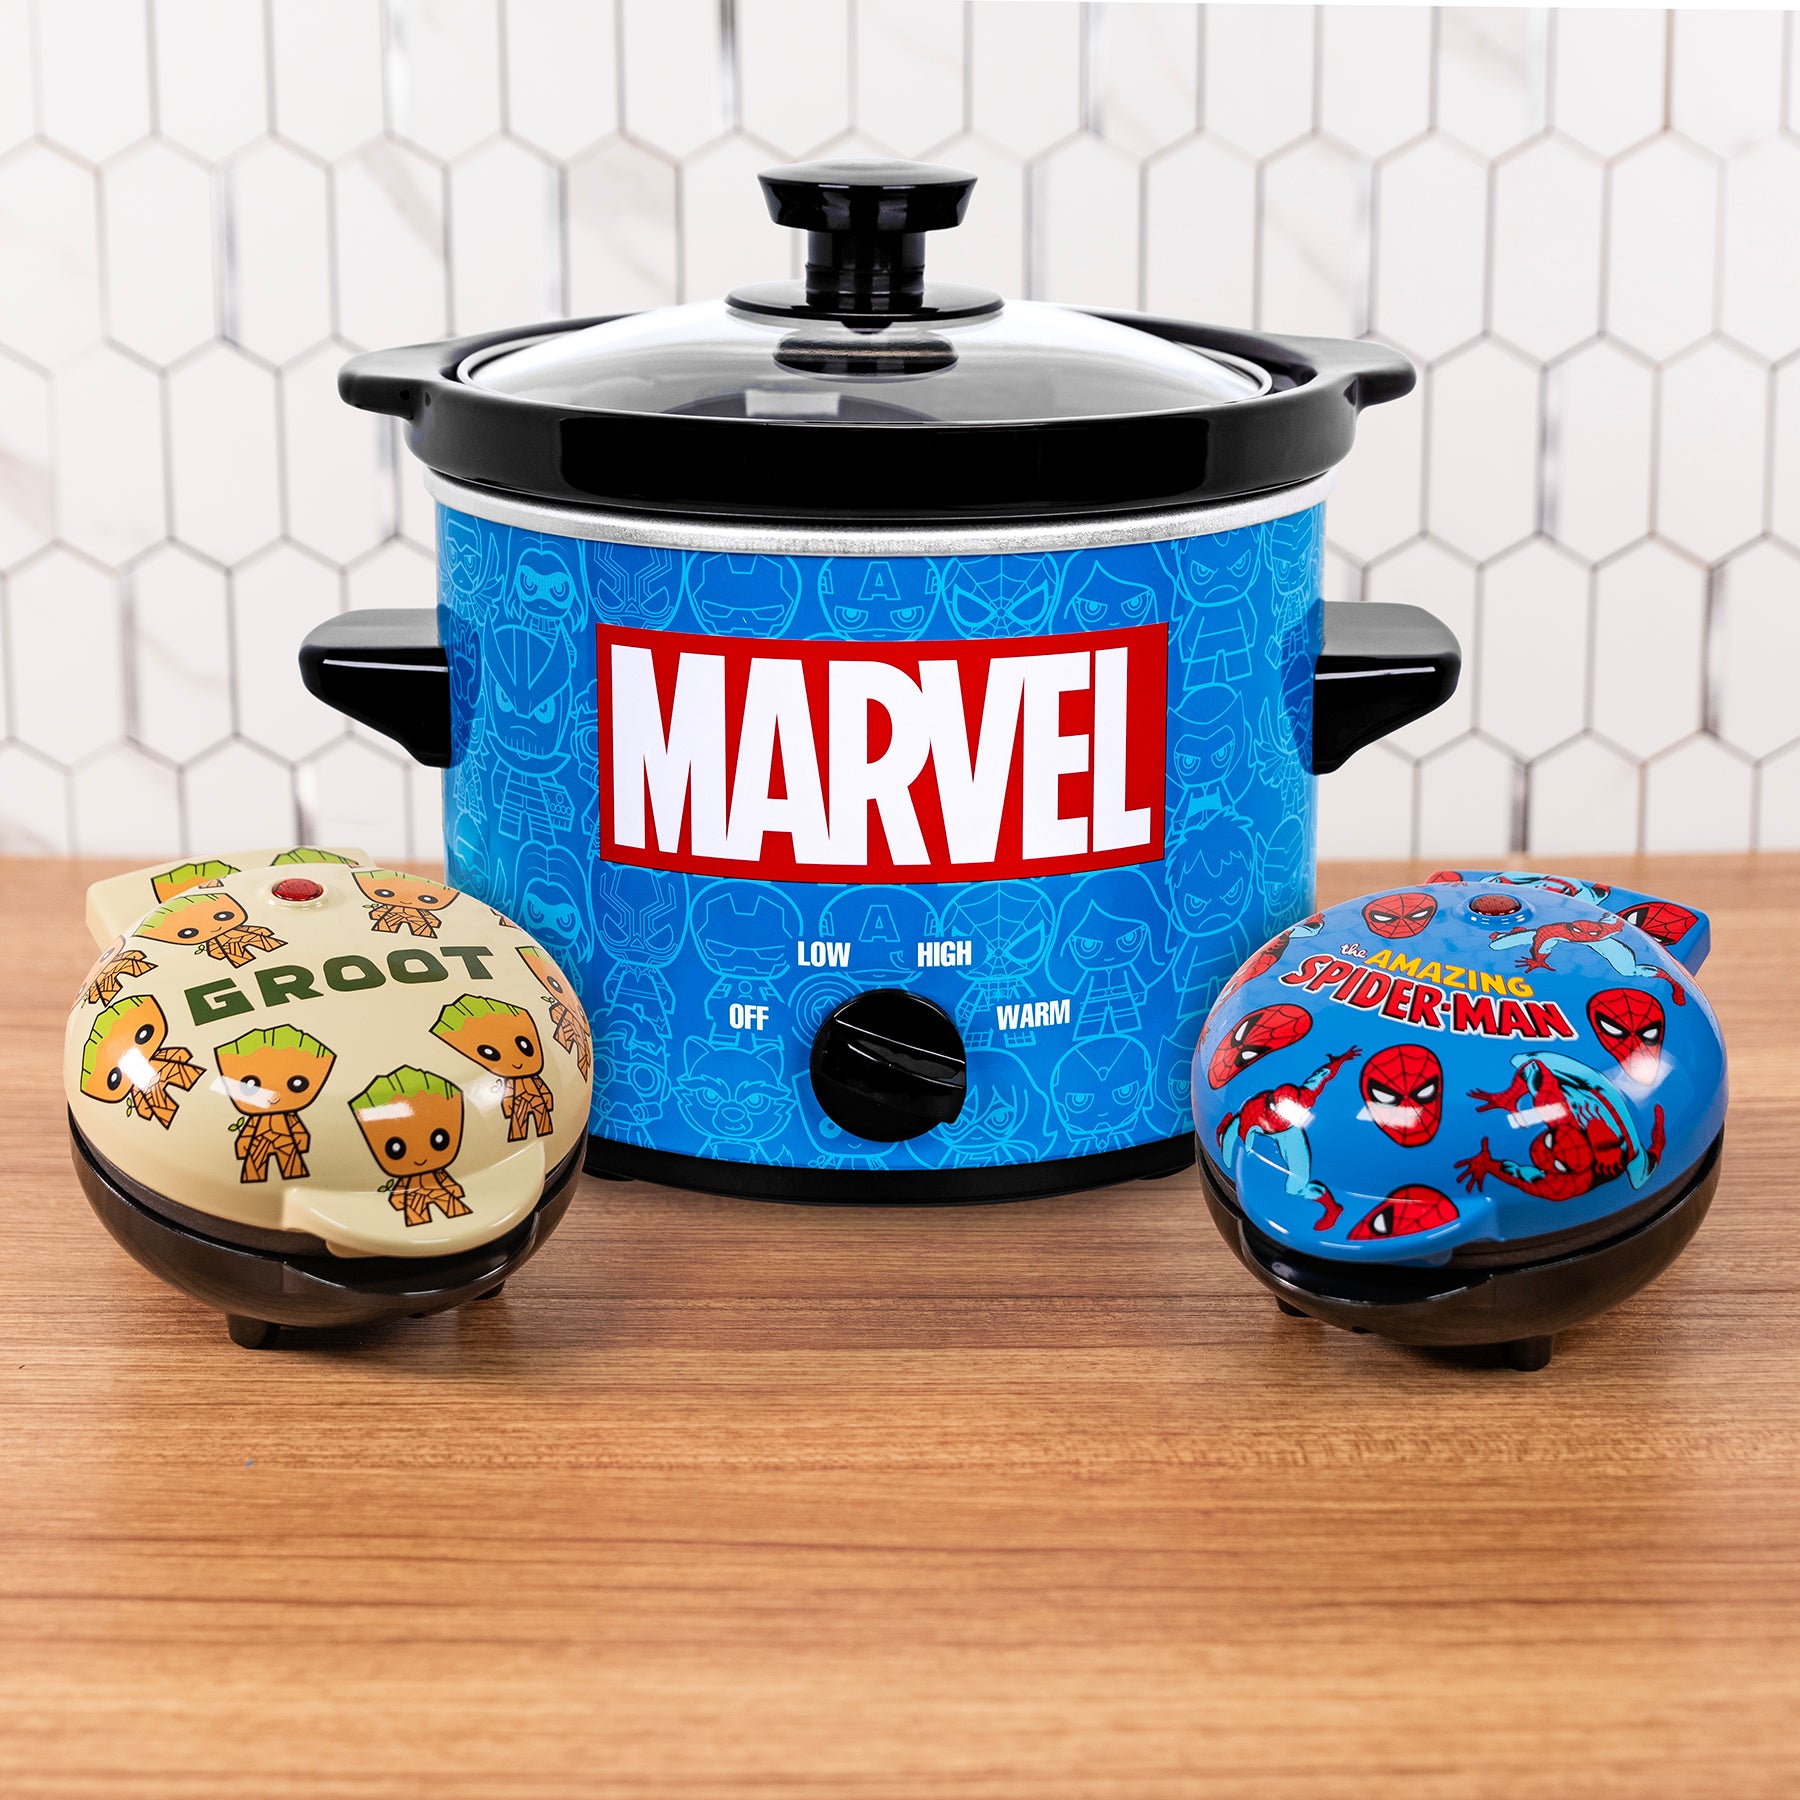 Uncanny Brands and Marvel Collaborate on New Cookware Line, Available Now at Kohl’s.